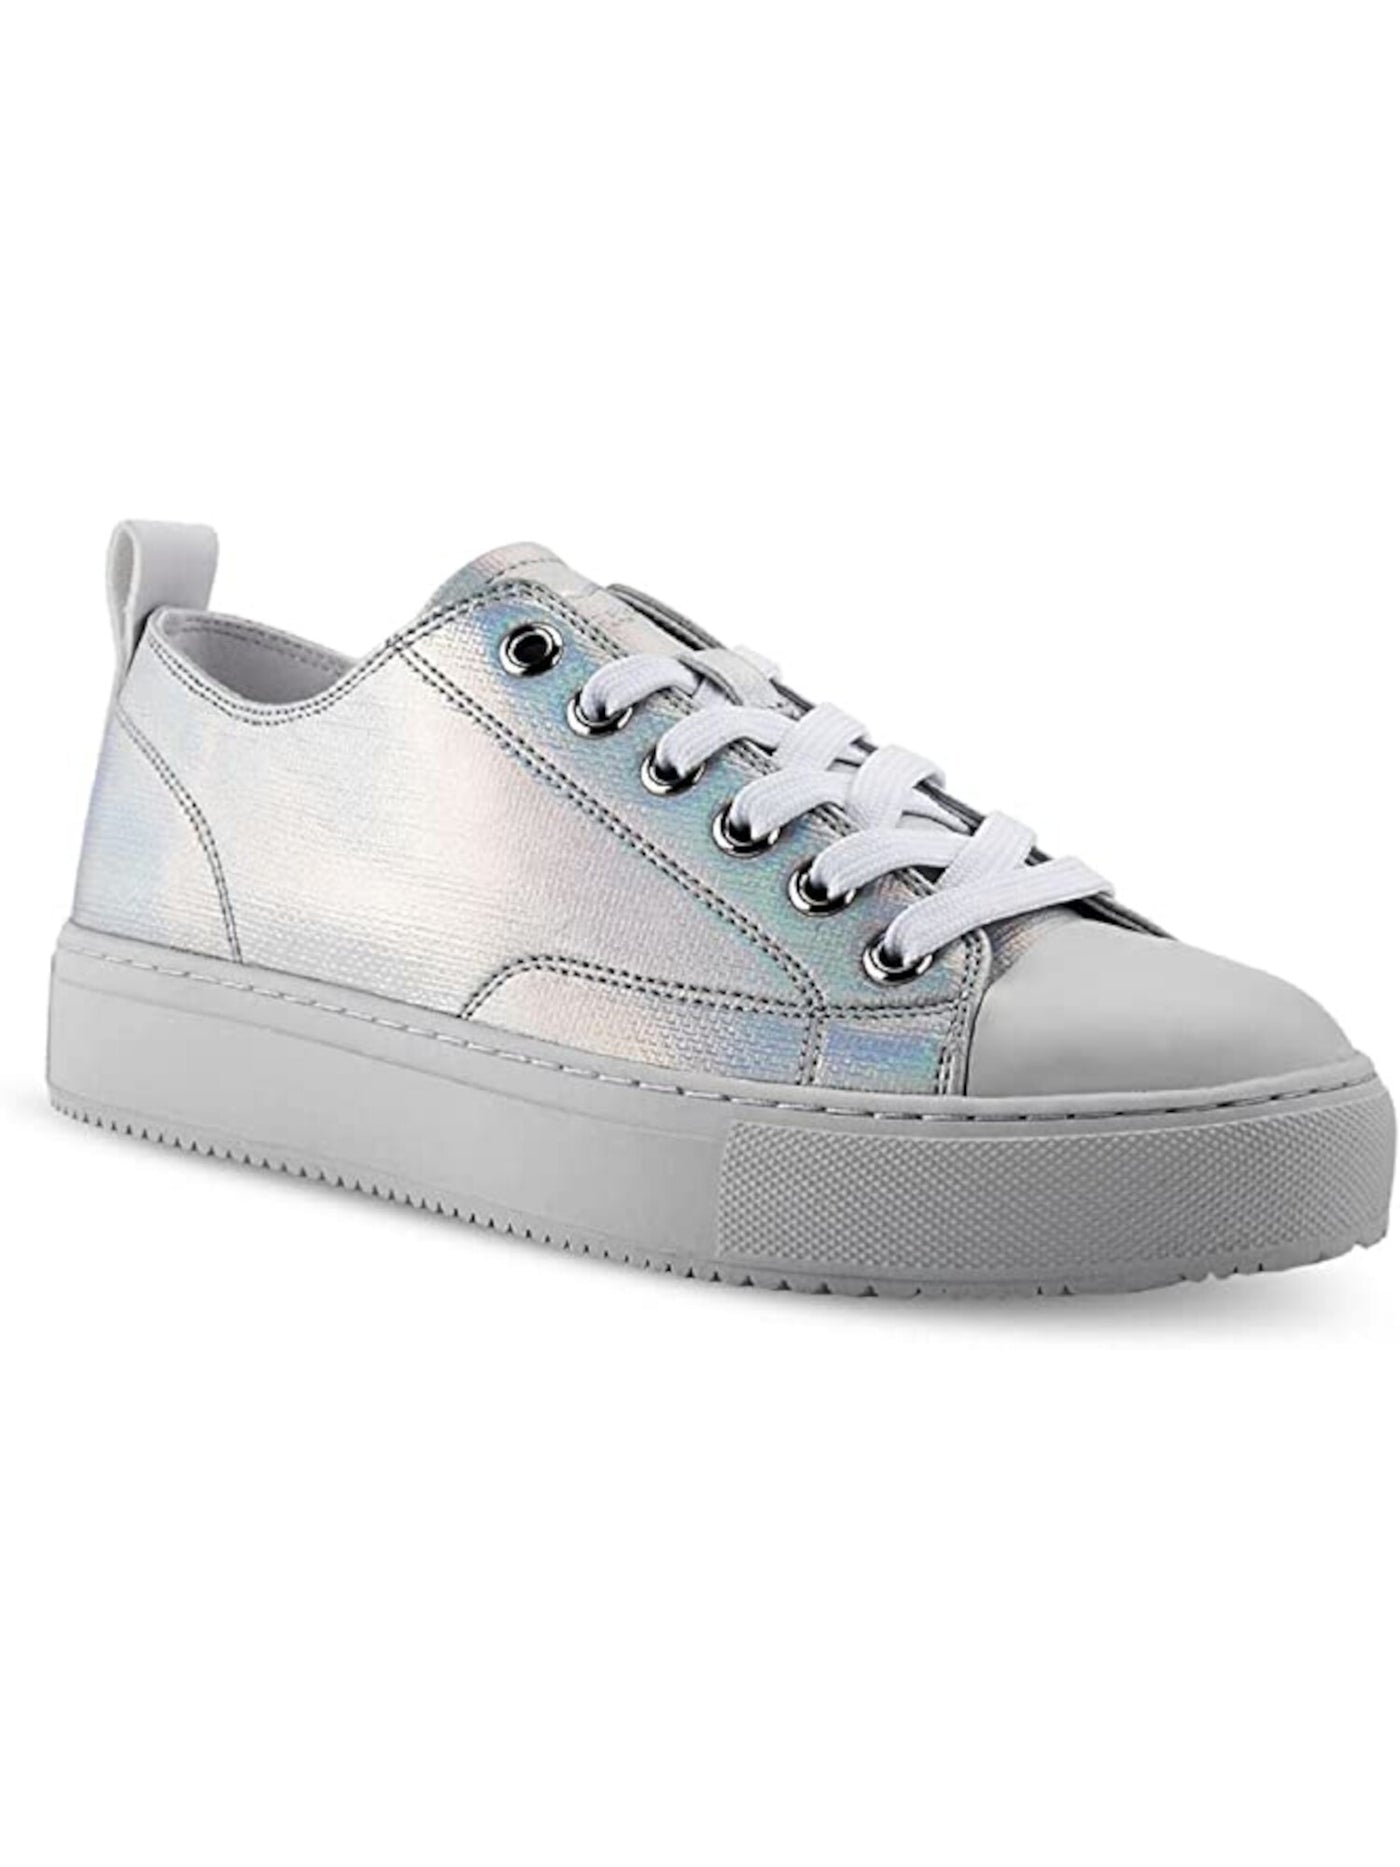 MARC FISHER Womens Silver Multi Metallic Cady Cap Toe Platform Lace-Up Athletic Sneakers Shoes 6.5 M